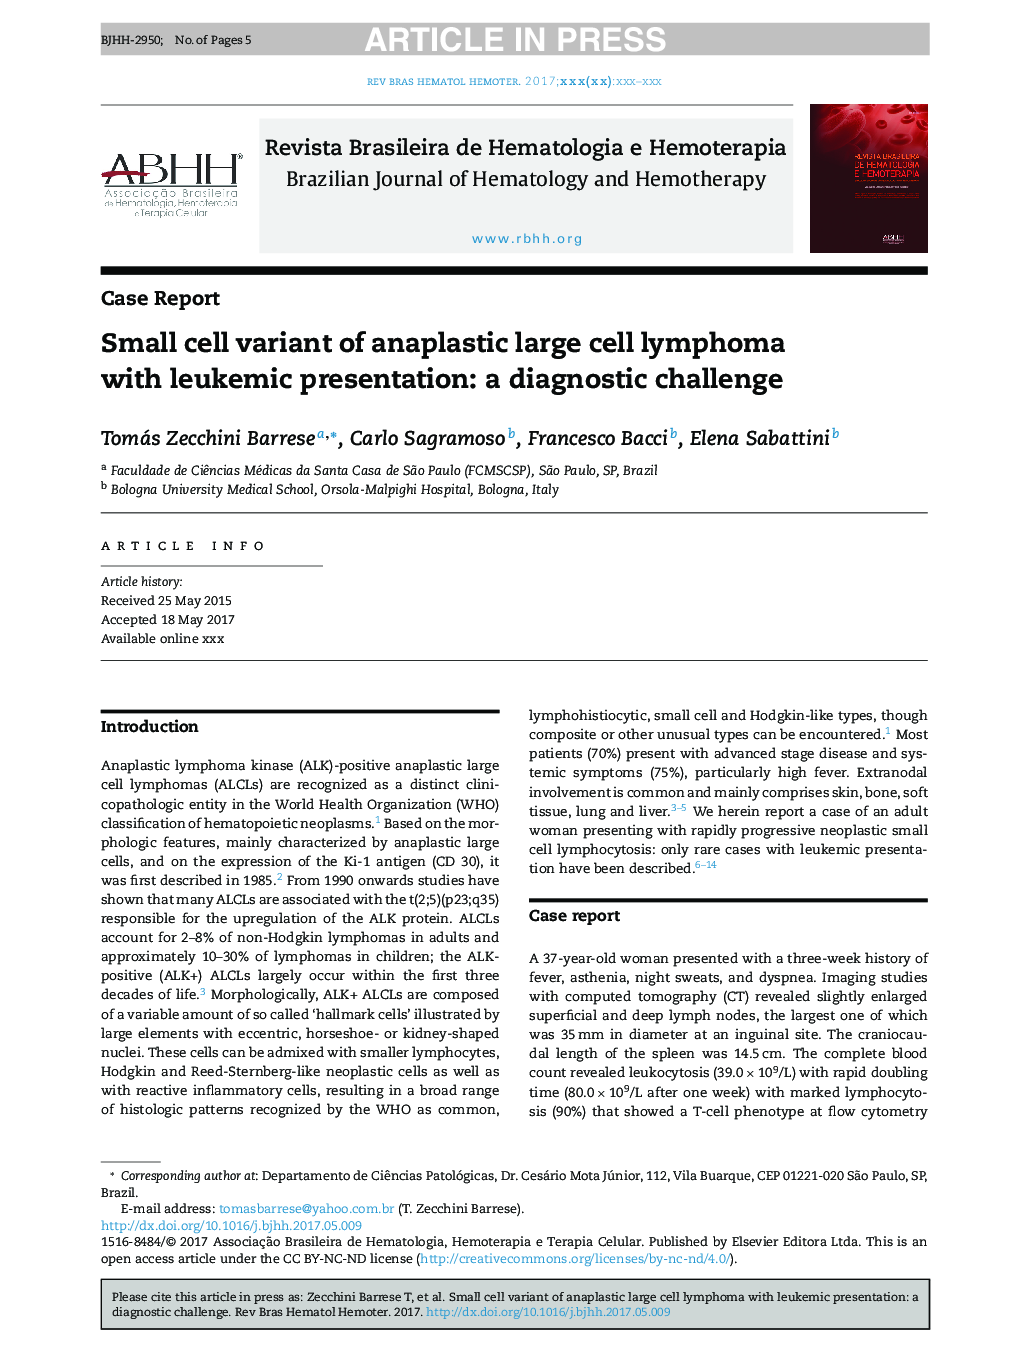 Small cell variant of anaplastic large cell lymphoma with leukemic presentation: a diagnostic challenge